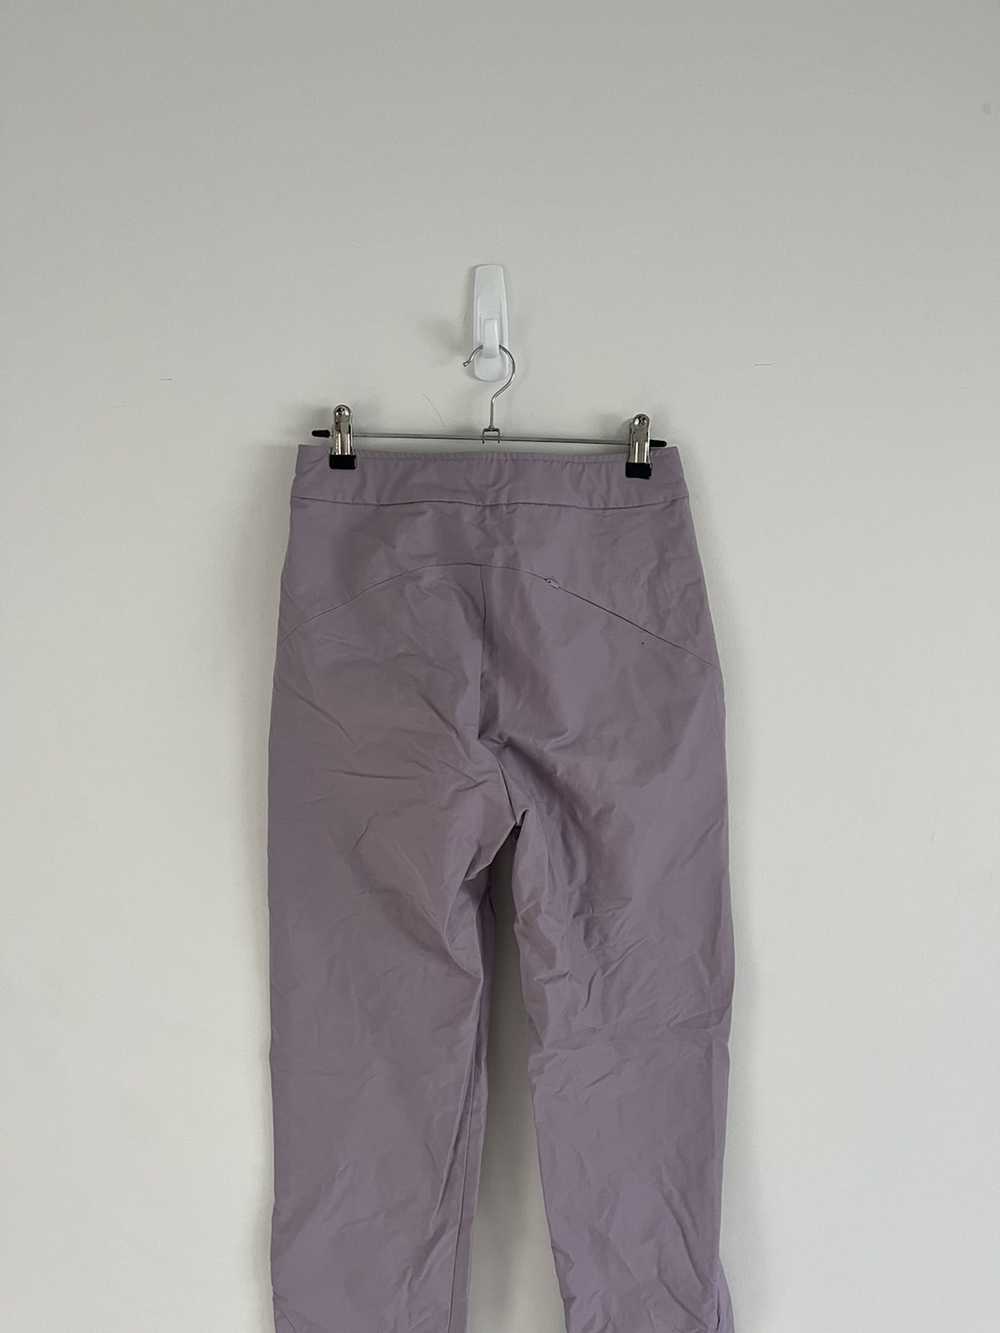 POST ARCHIVE FACTION (PAF) 5.0 Technical Pants Ri… - image 3